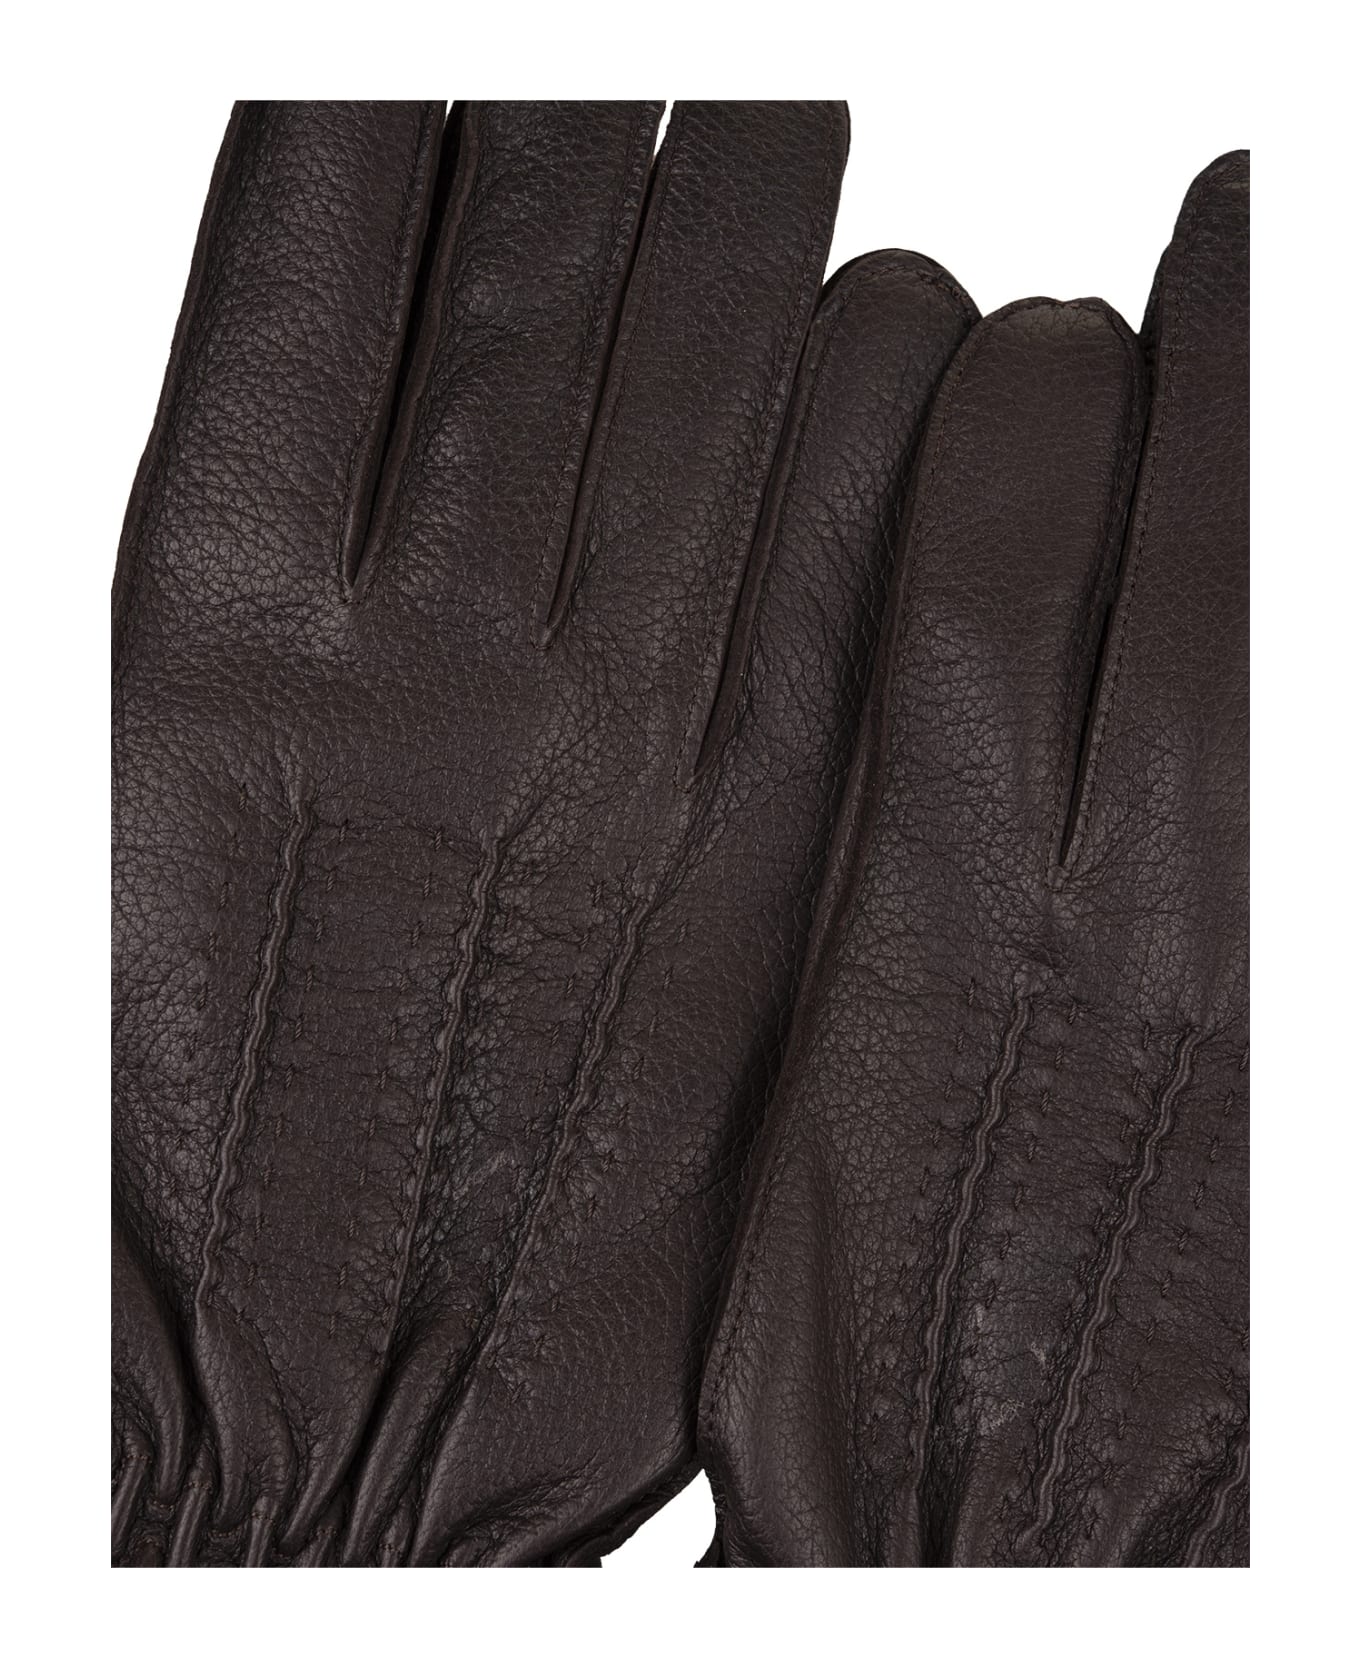 Orciani Drummed Gloves In Dark Brown Leather - Brown